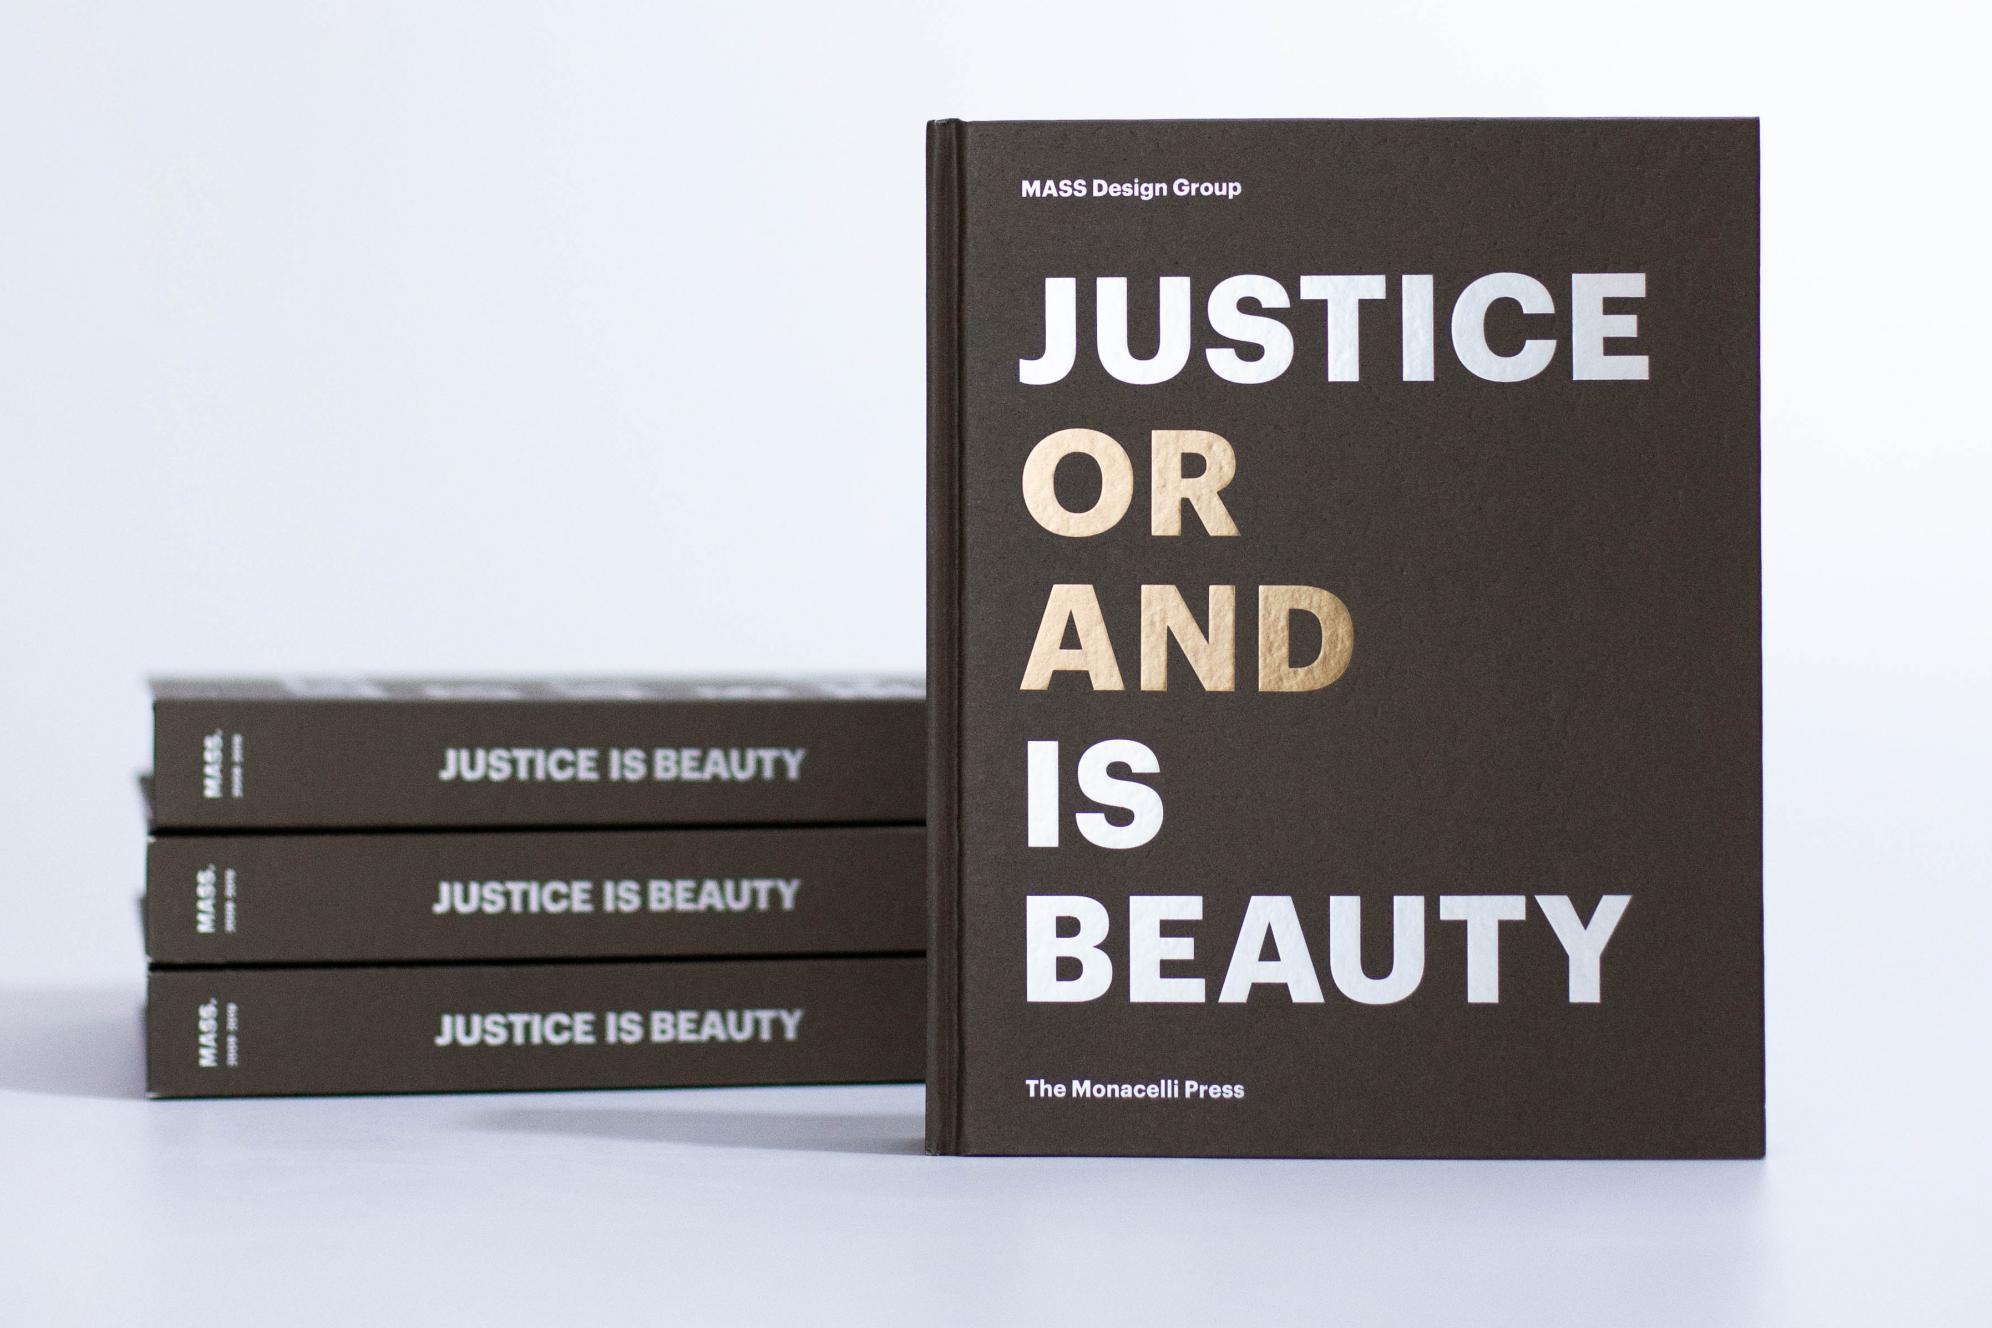 Justice is Beauty books stacked